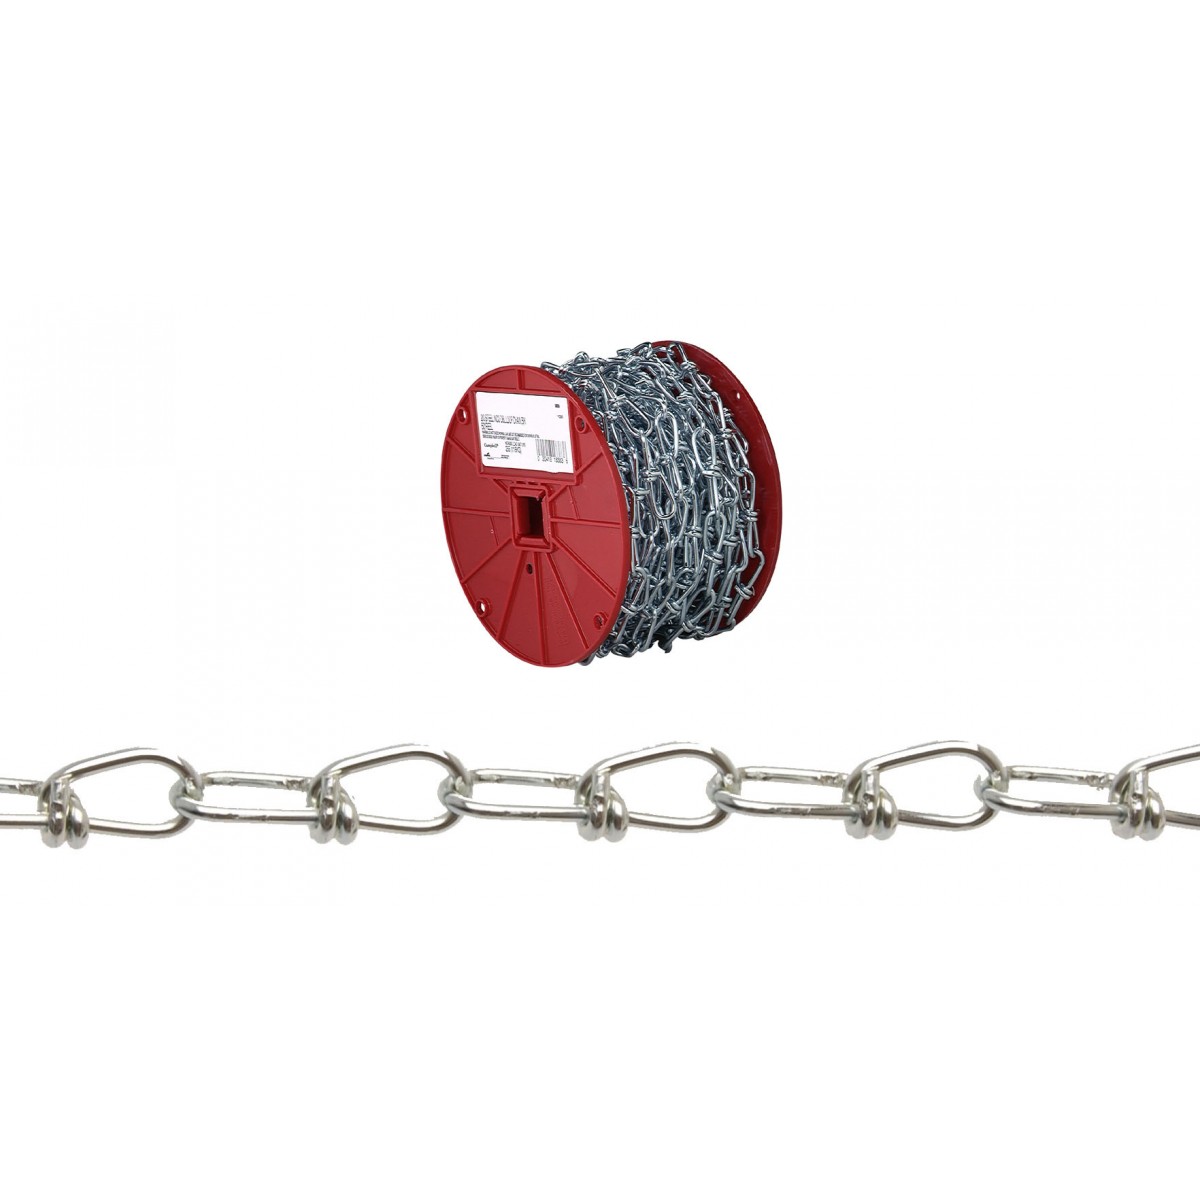 0724627 Inco Double Loop Chain, #4/0, 100 ft L, 365 lb Working Load, Low Carbon Steel, Zinc